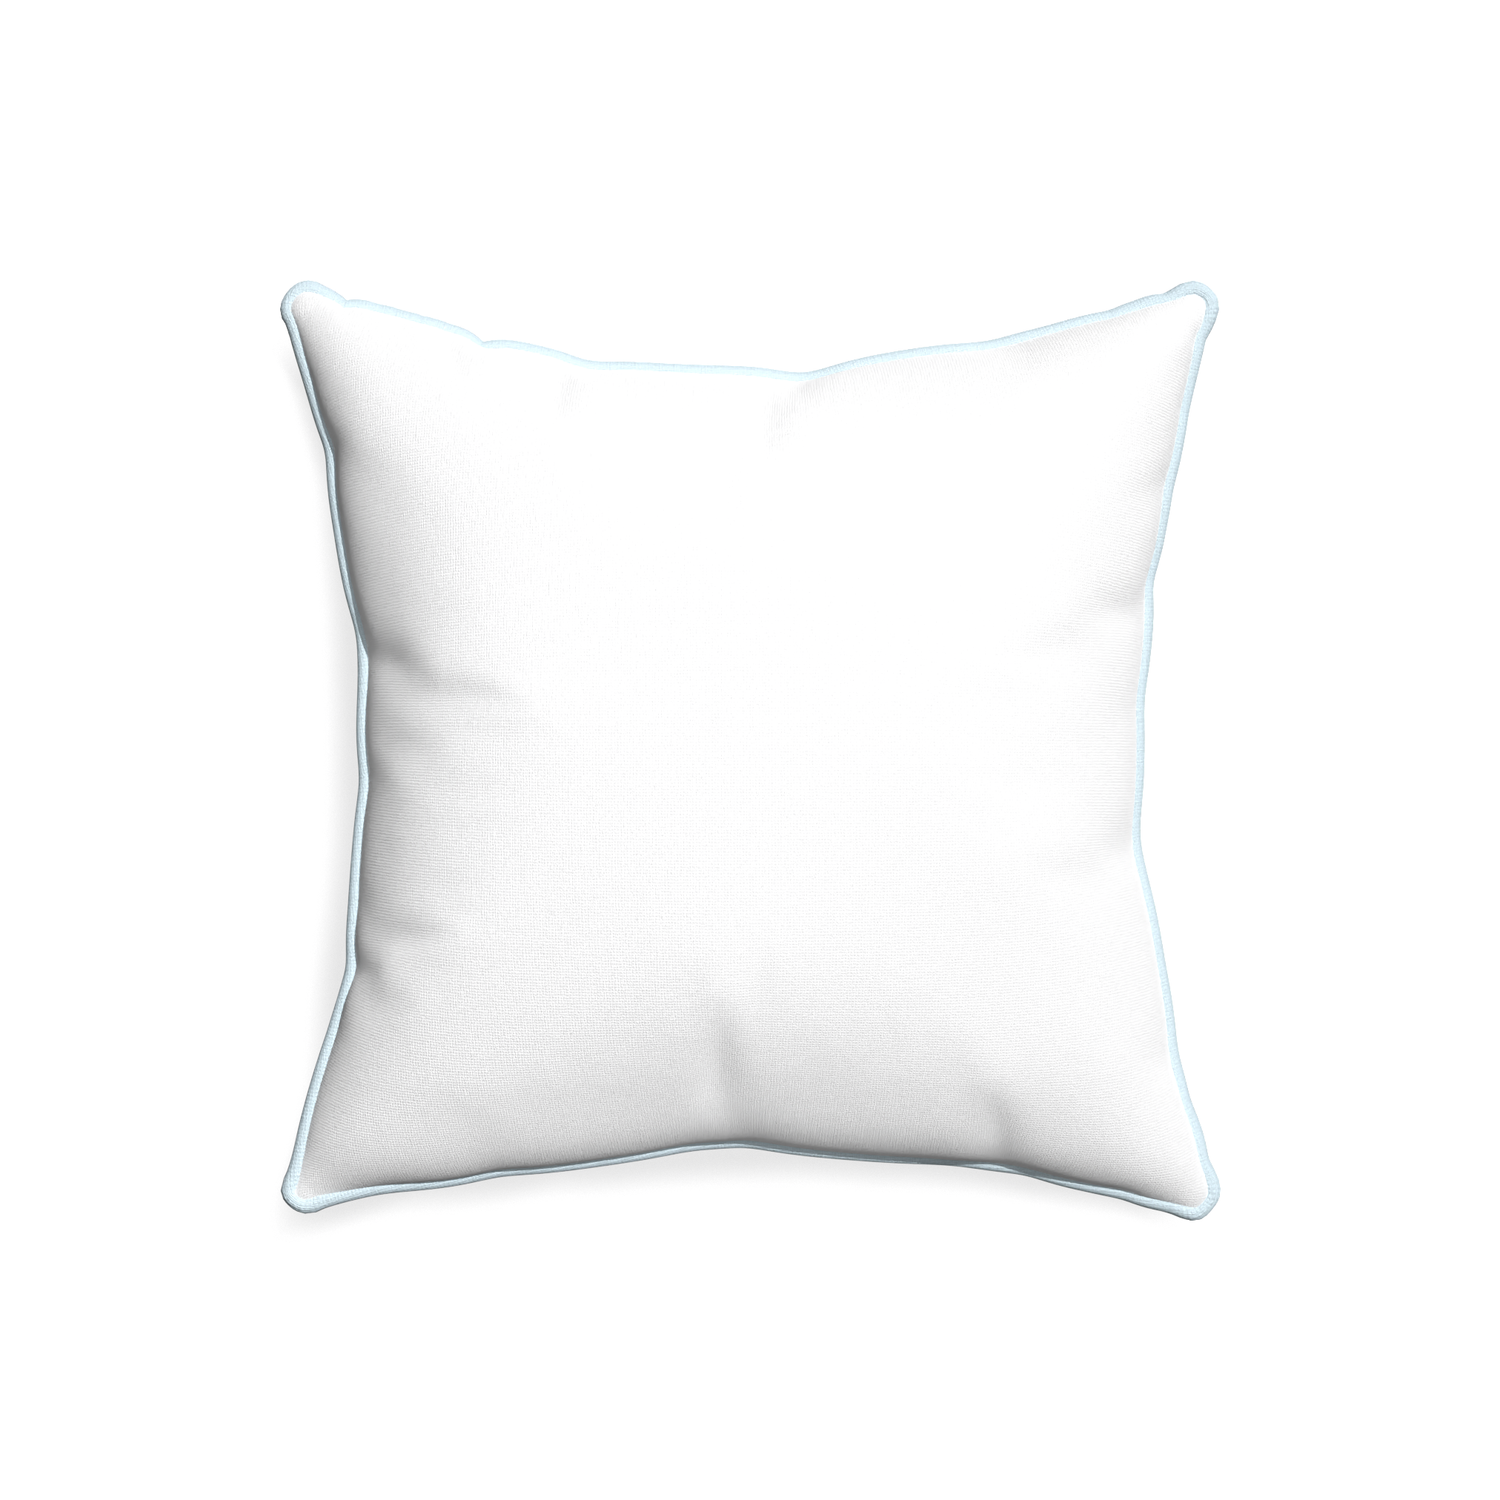 20-square snow custom white cottonpillow with powder piping on white background